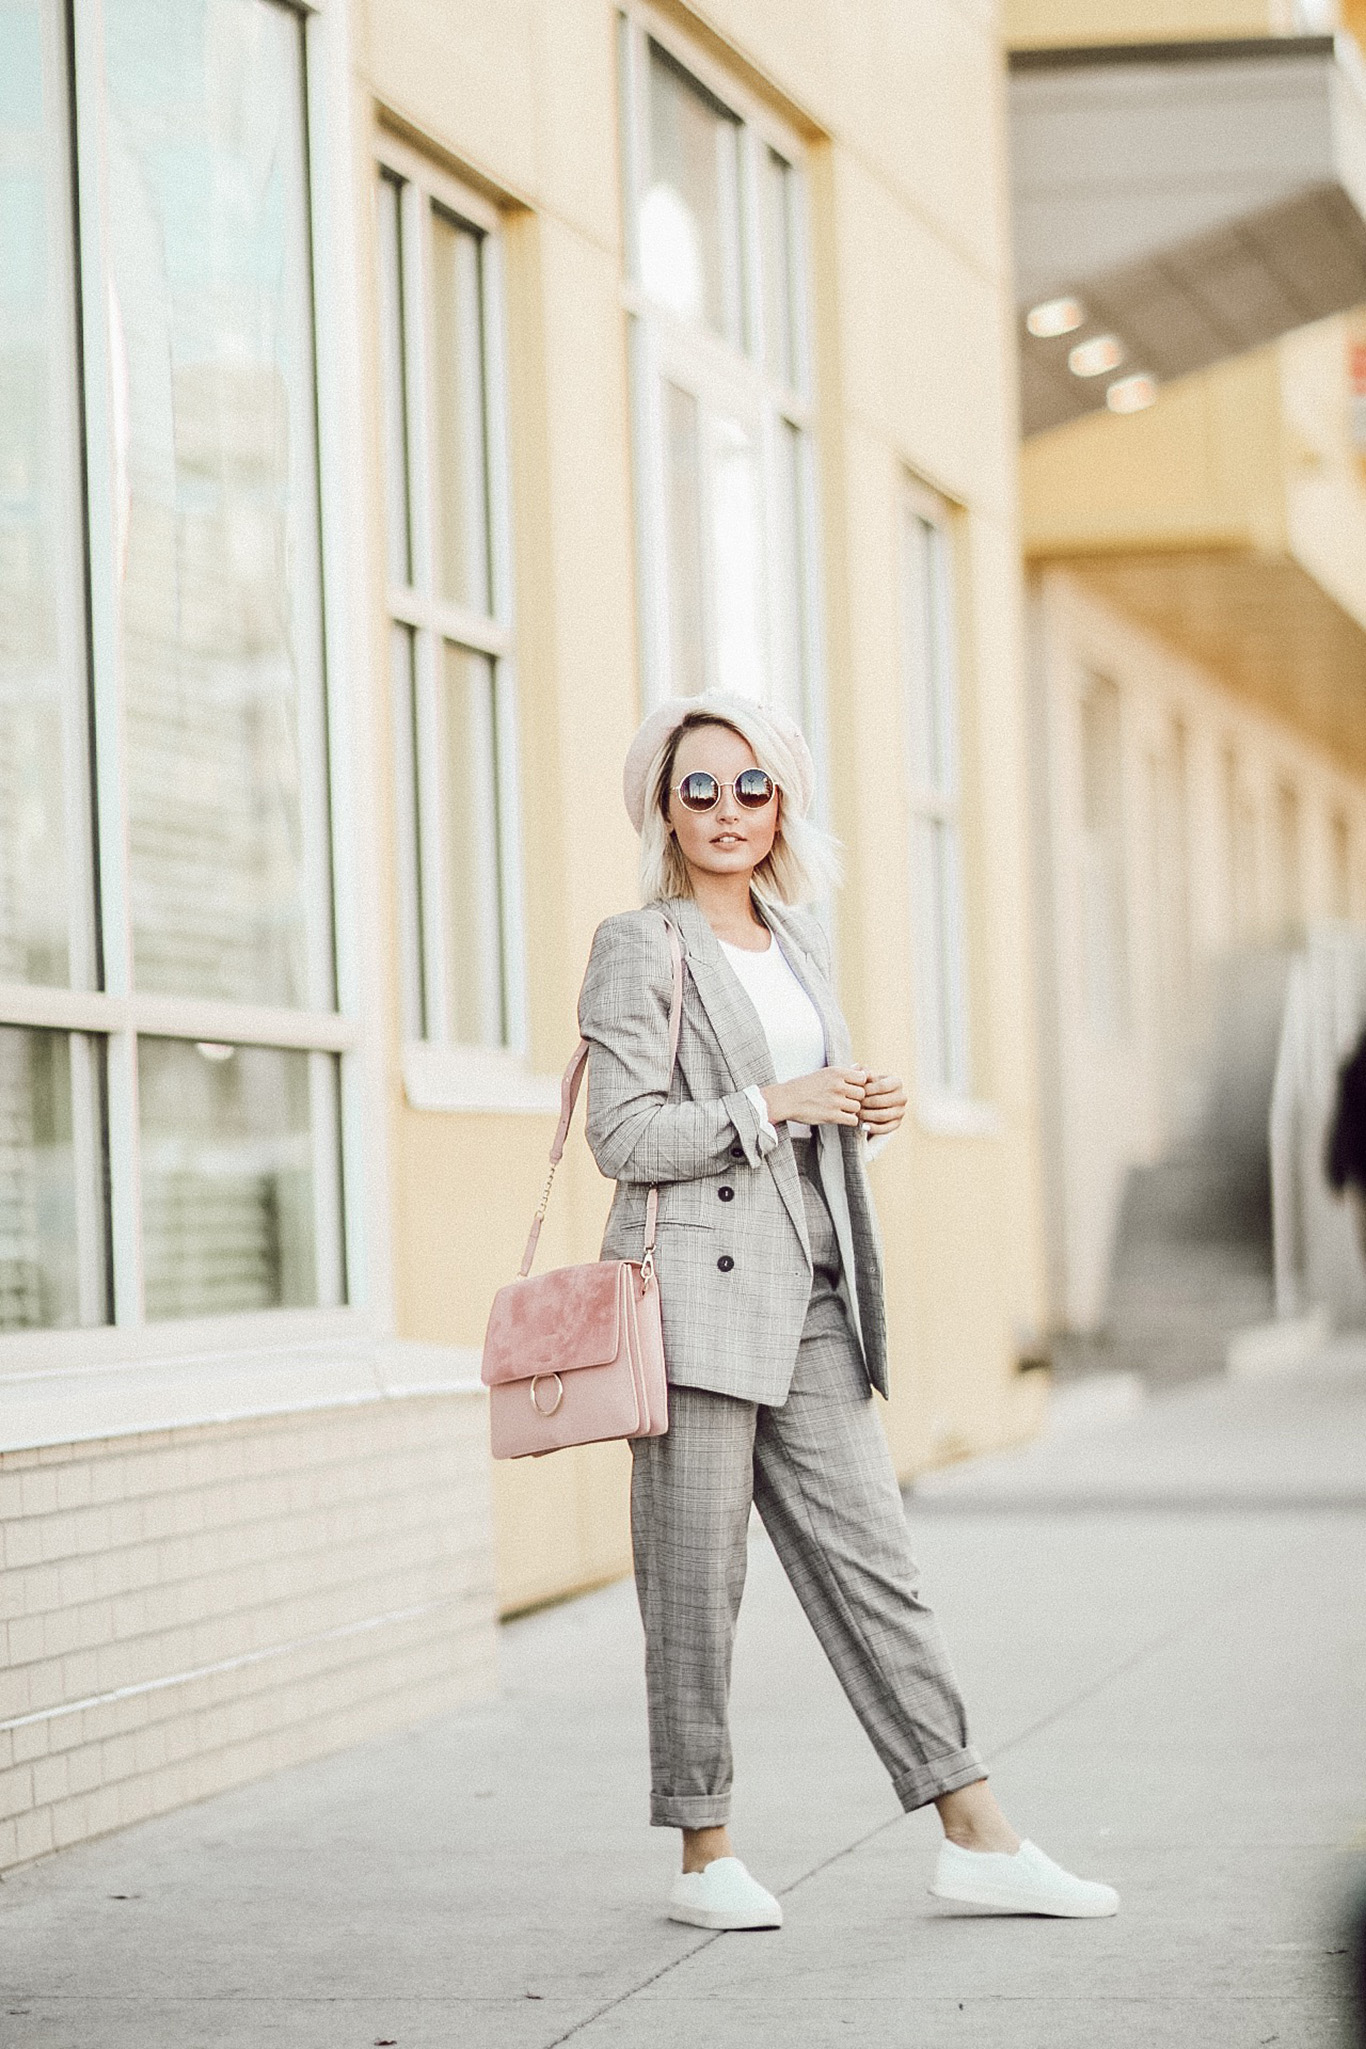 Alena Gidenko of modaprints.com shares tips on how to style down a suit for women